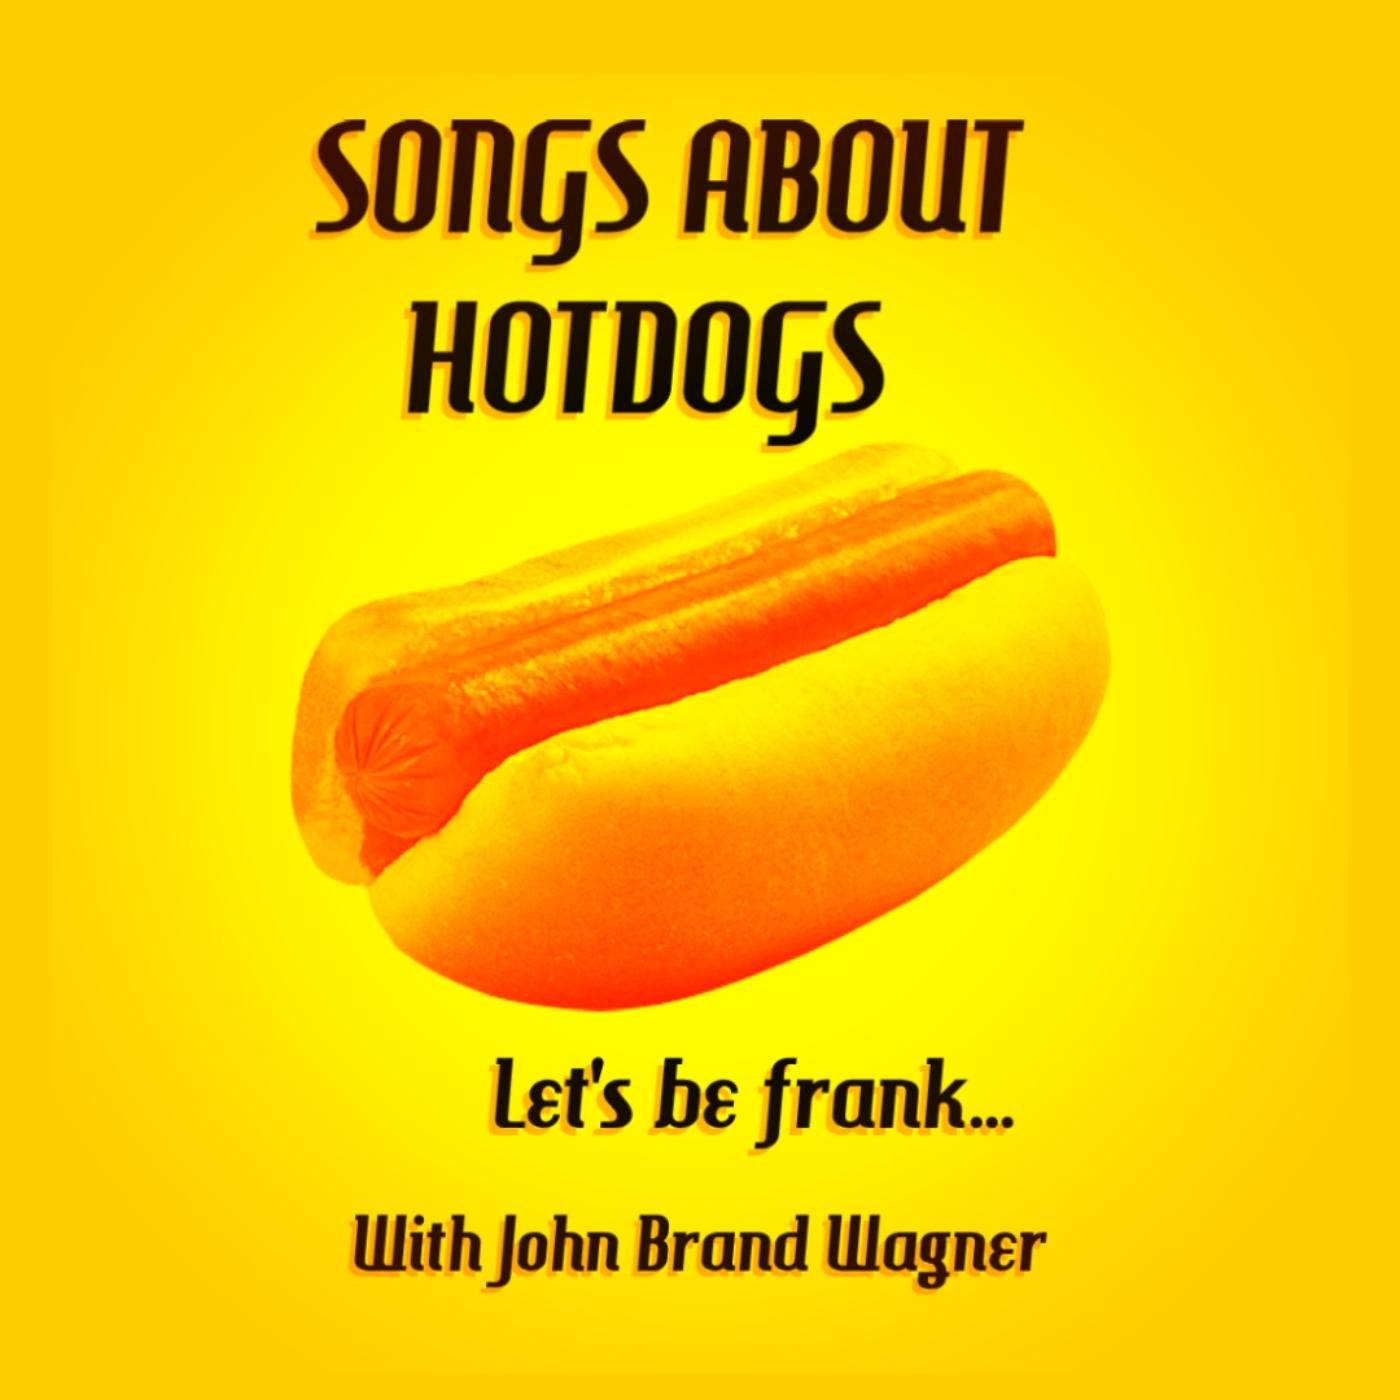 Songs About Hotdogs! The podcast were John Brand Wagner shows his friends all the hotdog songs he's found! 
Let's be frank...
@johnbrandwagner